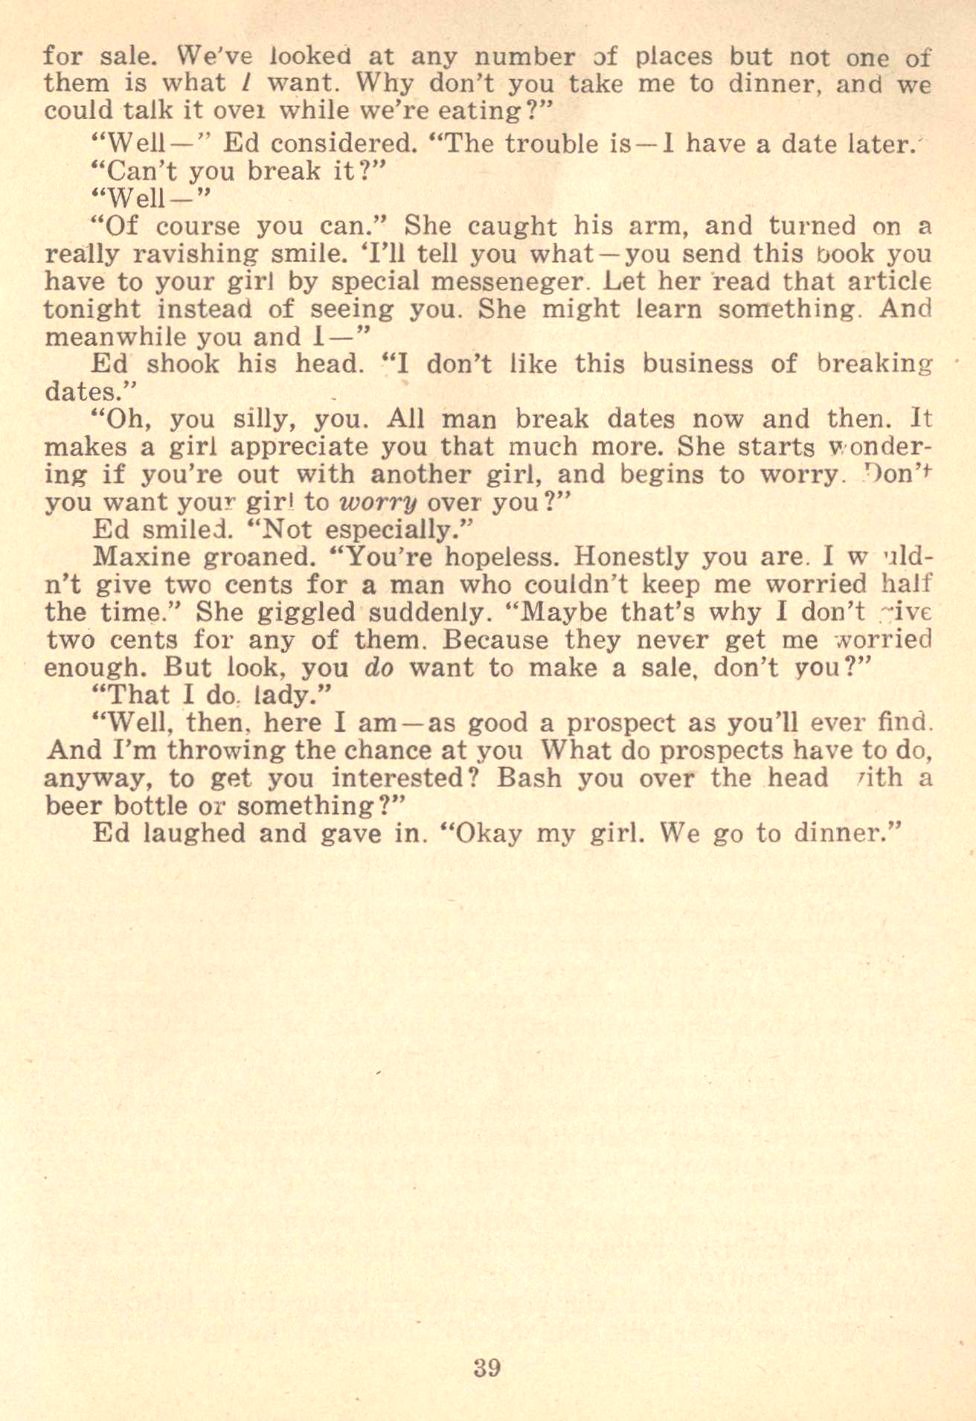 The Pick-Up Girl by Florenz Branch page 041.jpg